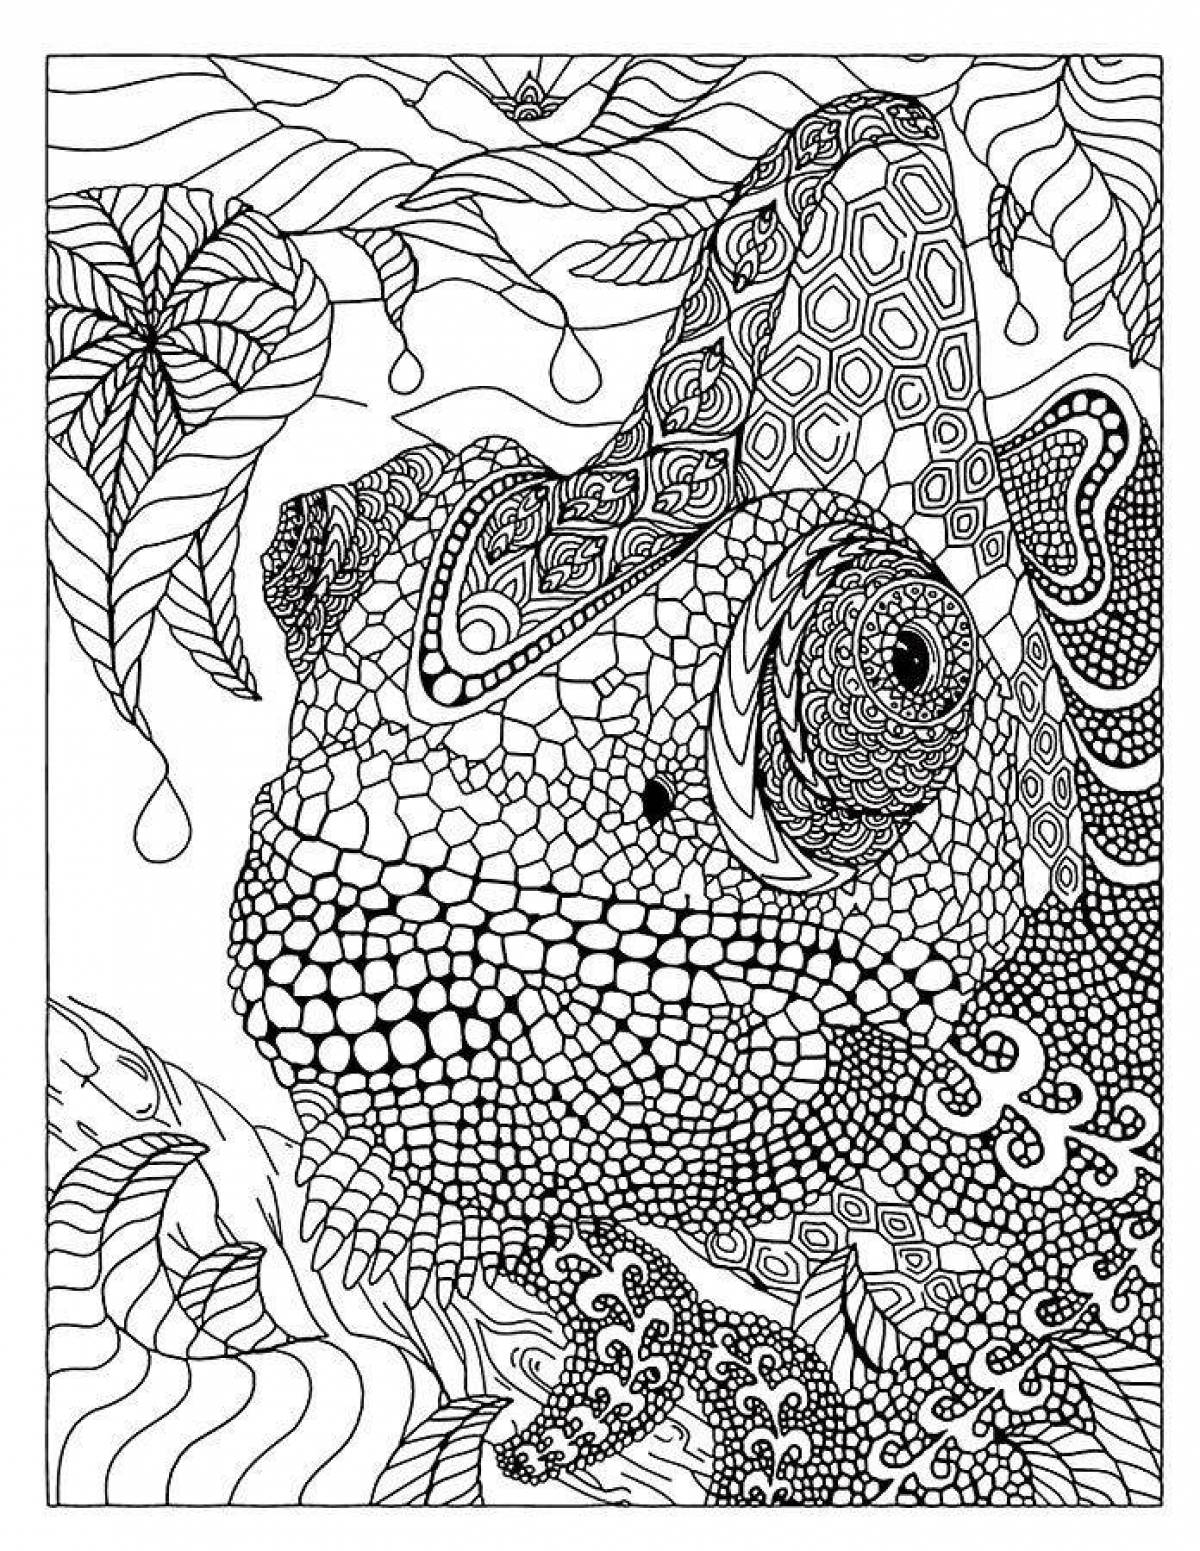 Fun and challenging coloring book